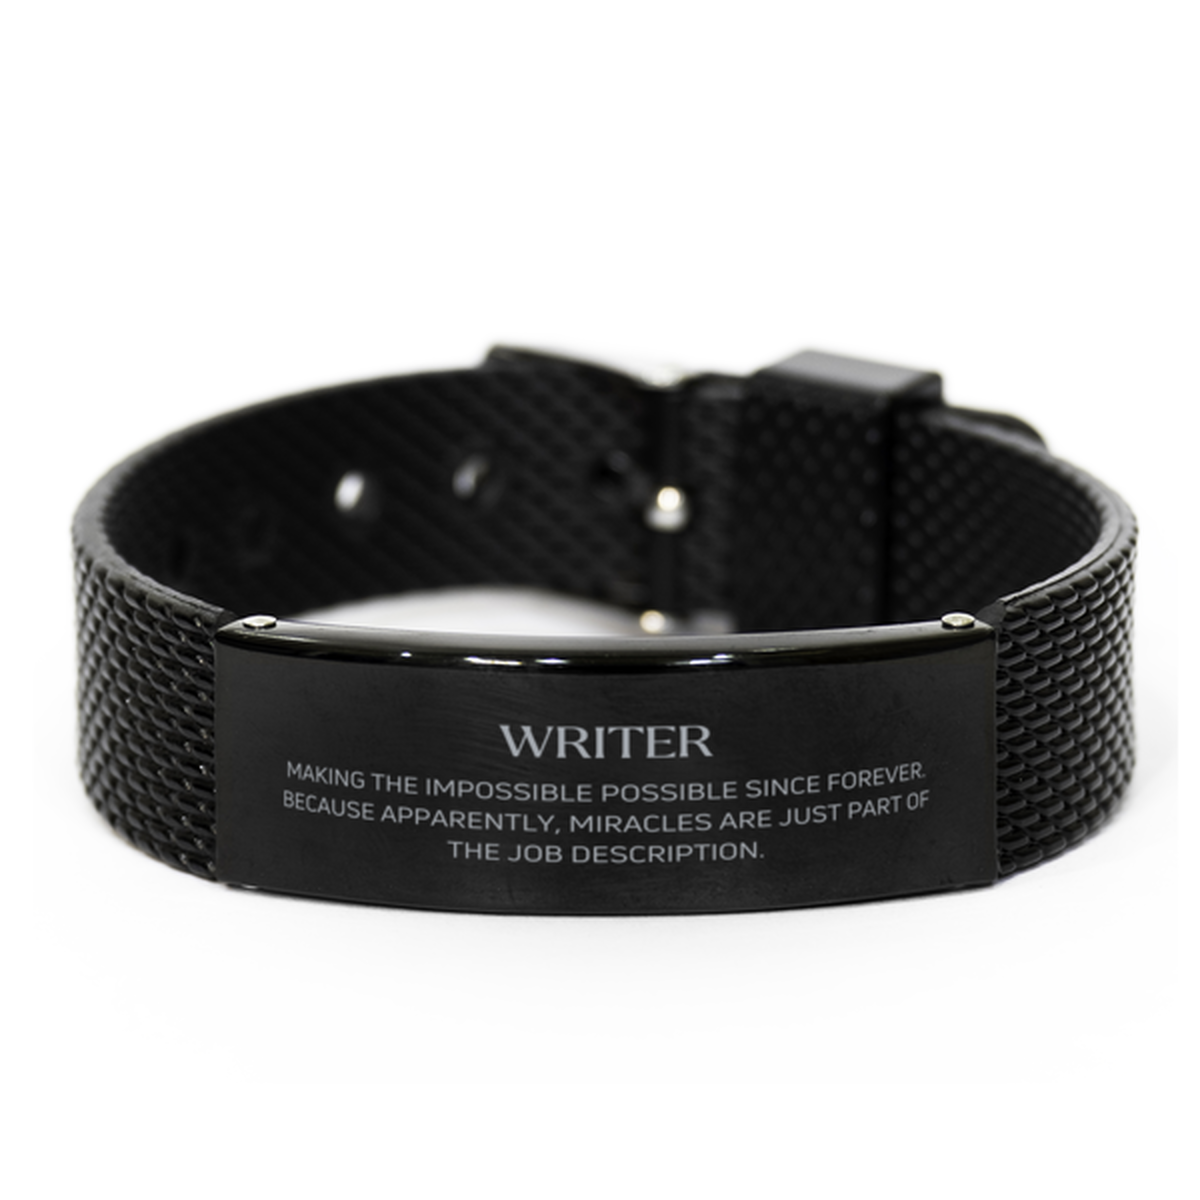 Funny Writer Gifts, Miracles are just part of the job description, Inspirational Birthday Black Shark Mesh Bracelet For Writer, Men, Women, Coworkers, Friends, Boss